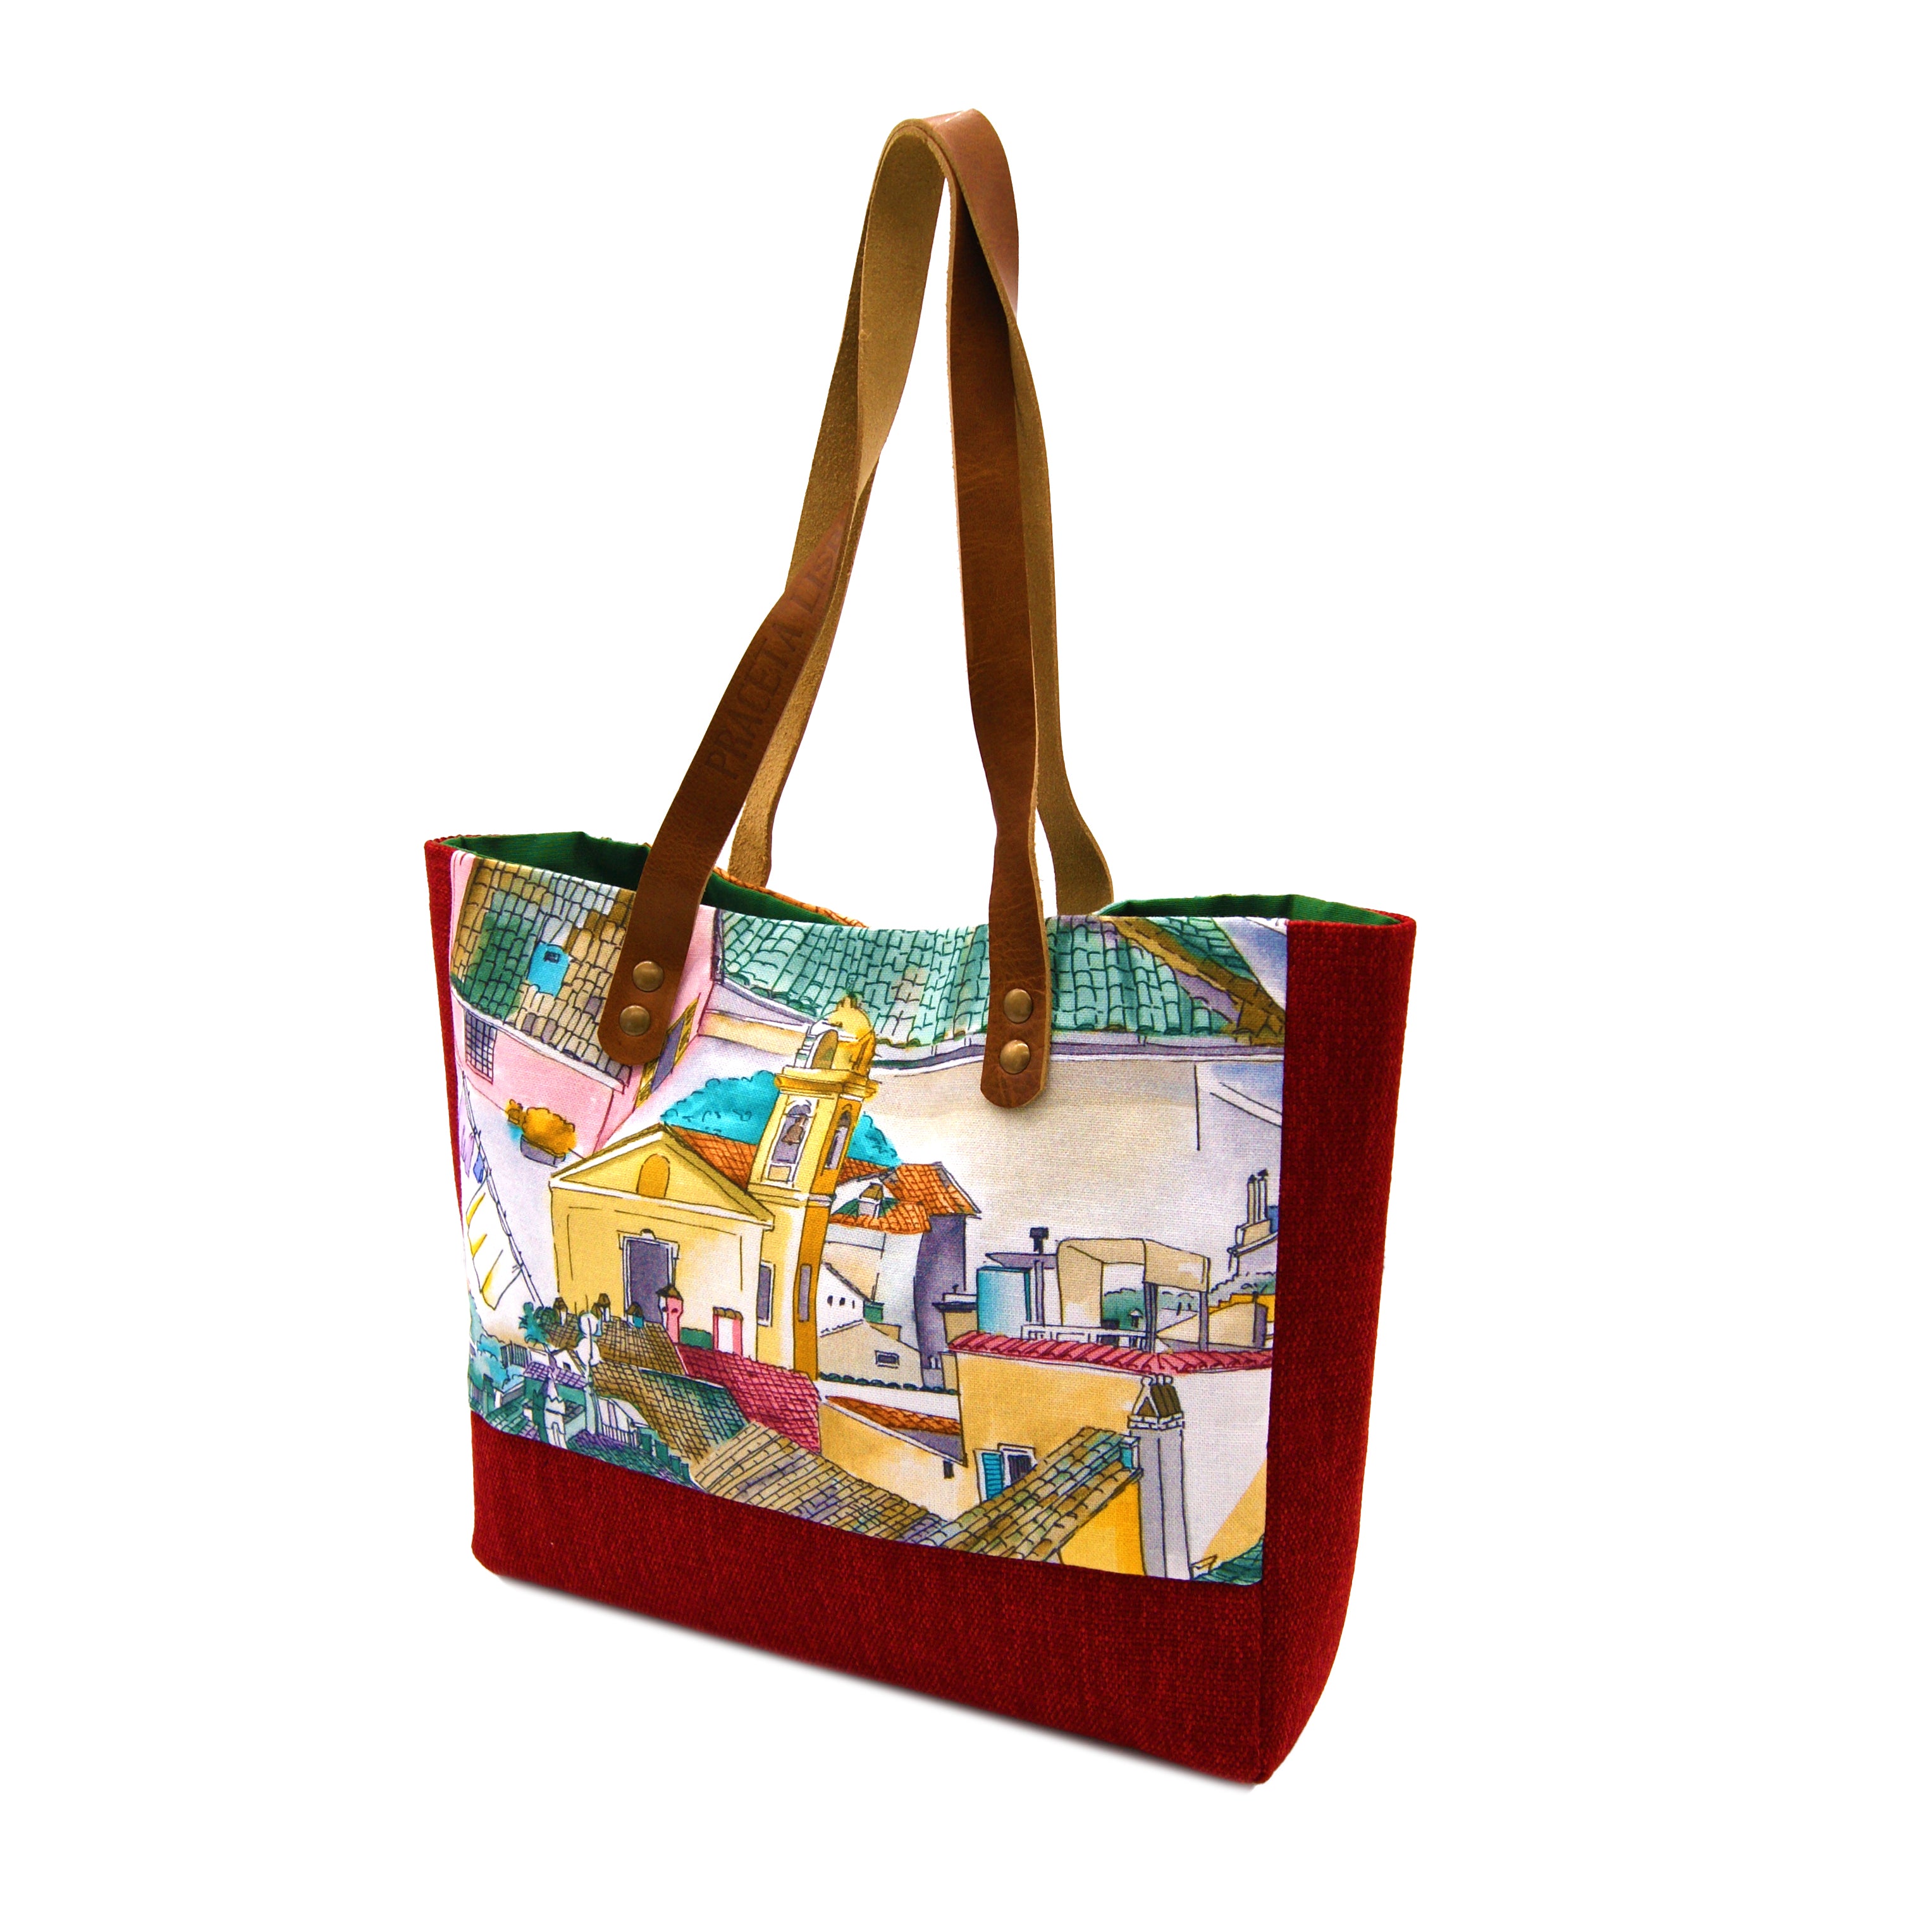 This handbag is Lightweight, soft and durable.